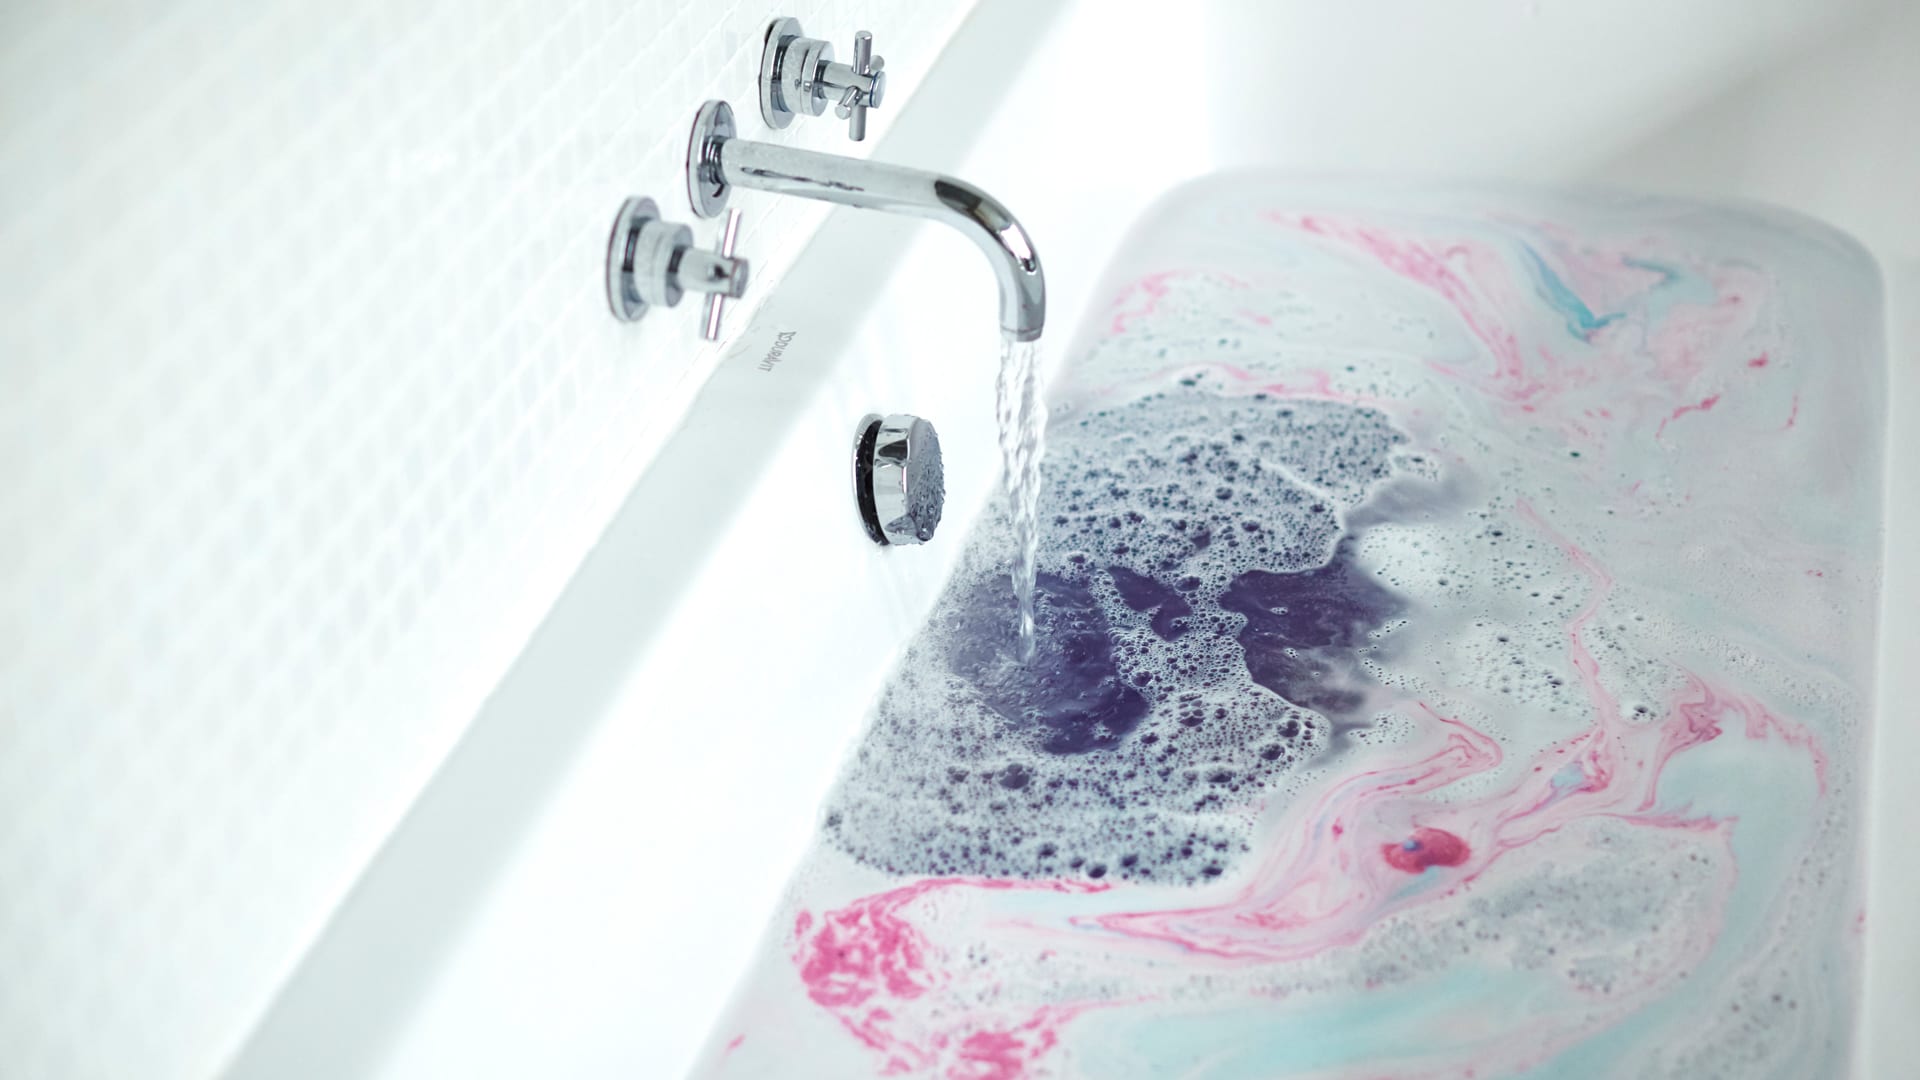 Baths Are So Hot Right Now: The Cultural (And Lucrative) Soaking Industry